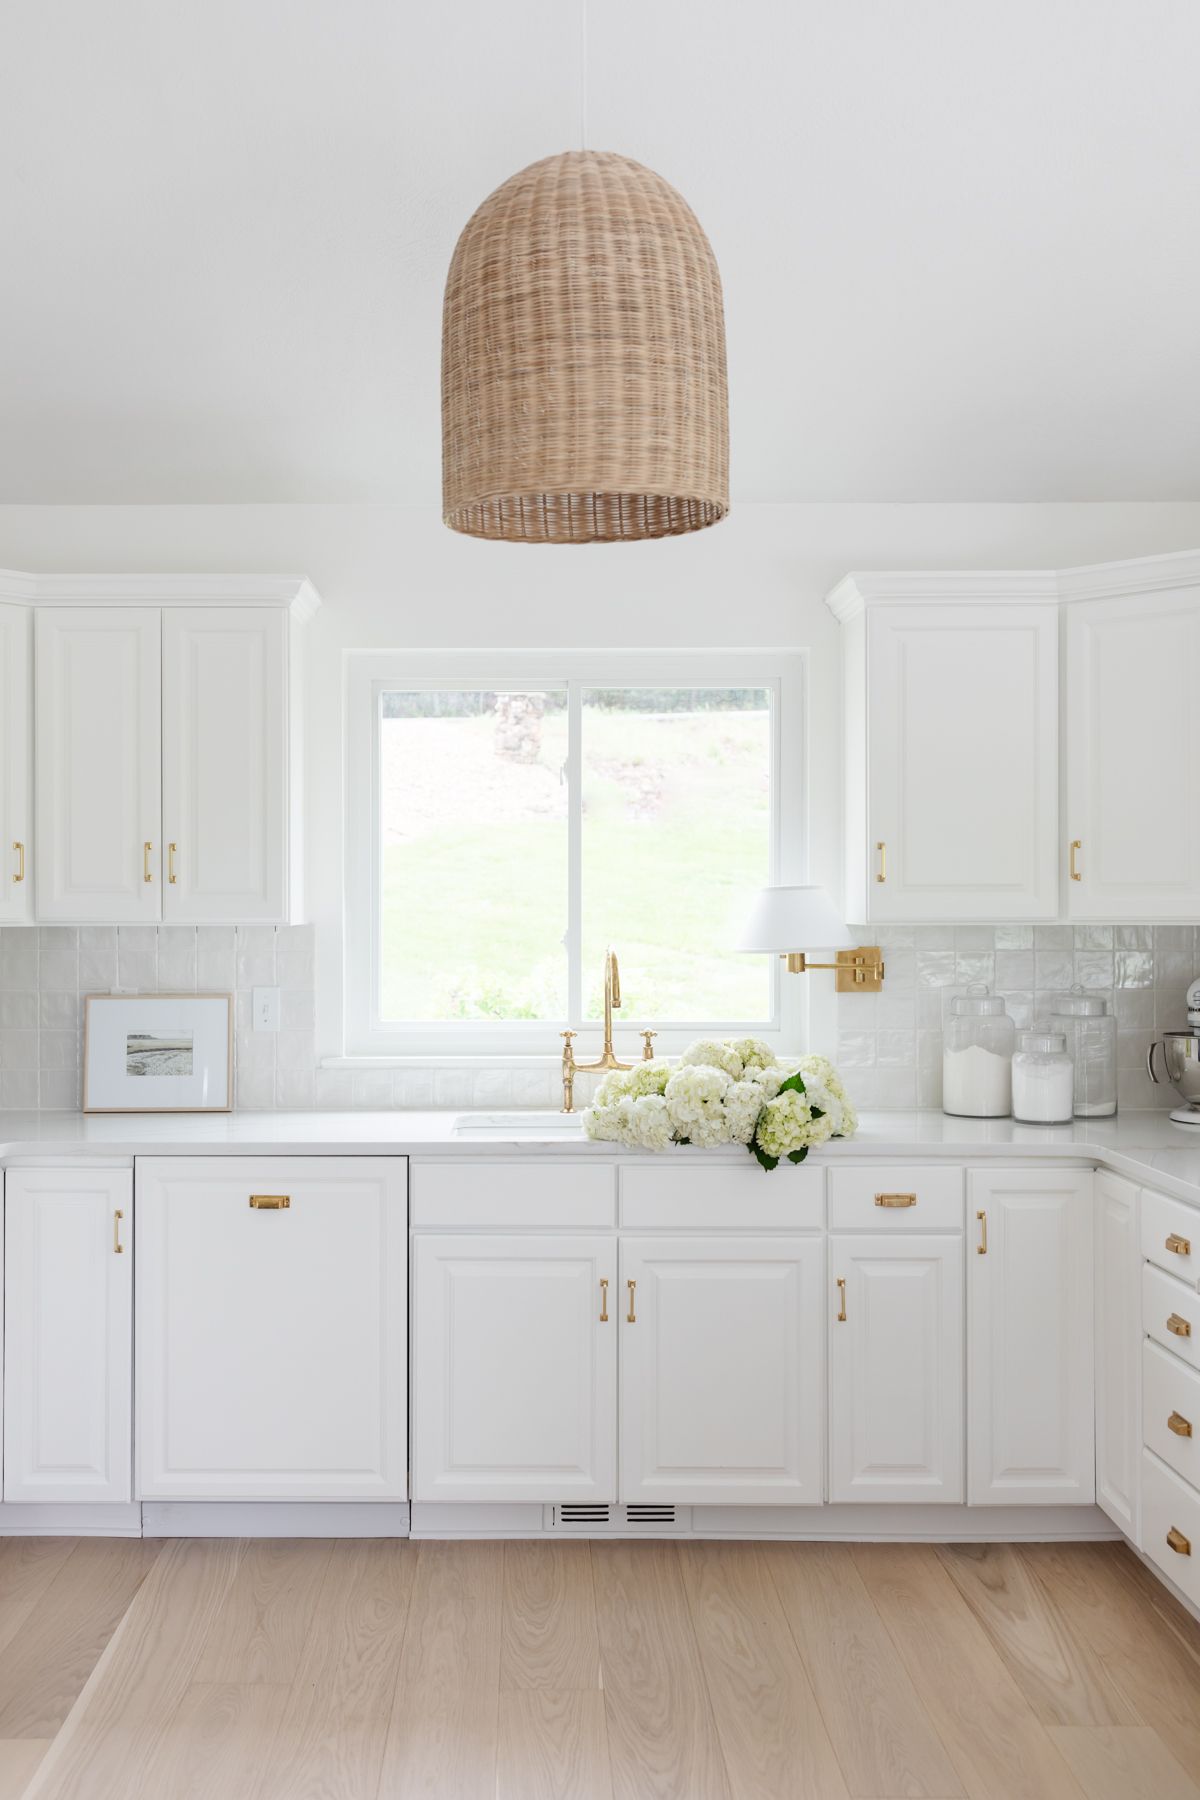 A white kitchen with glass canisters for baking supplies